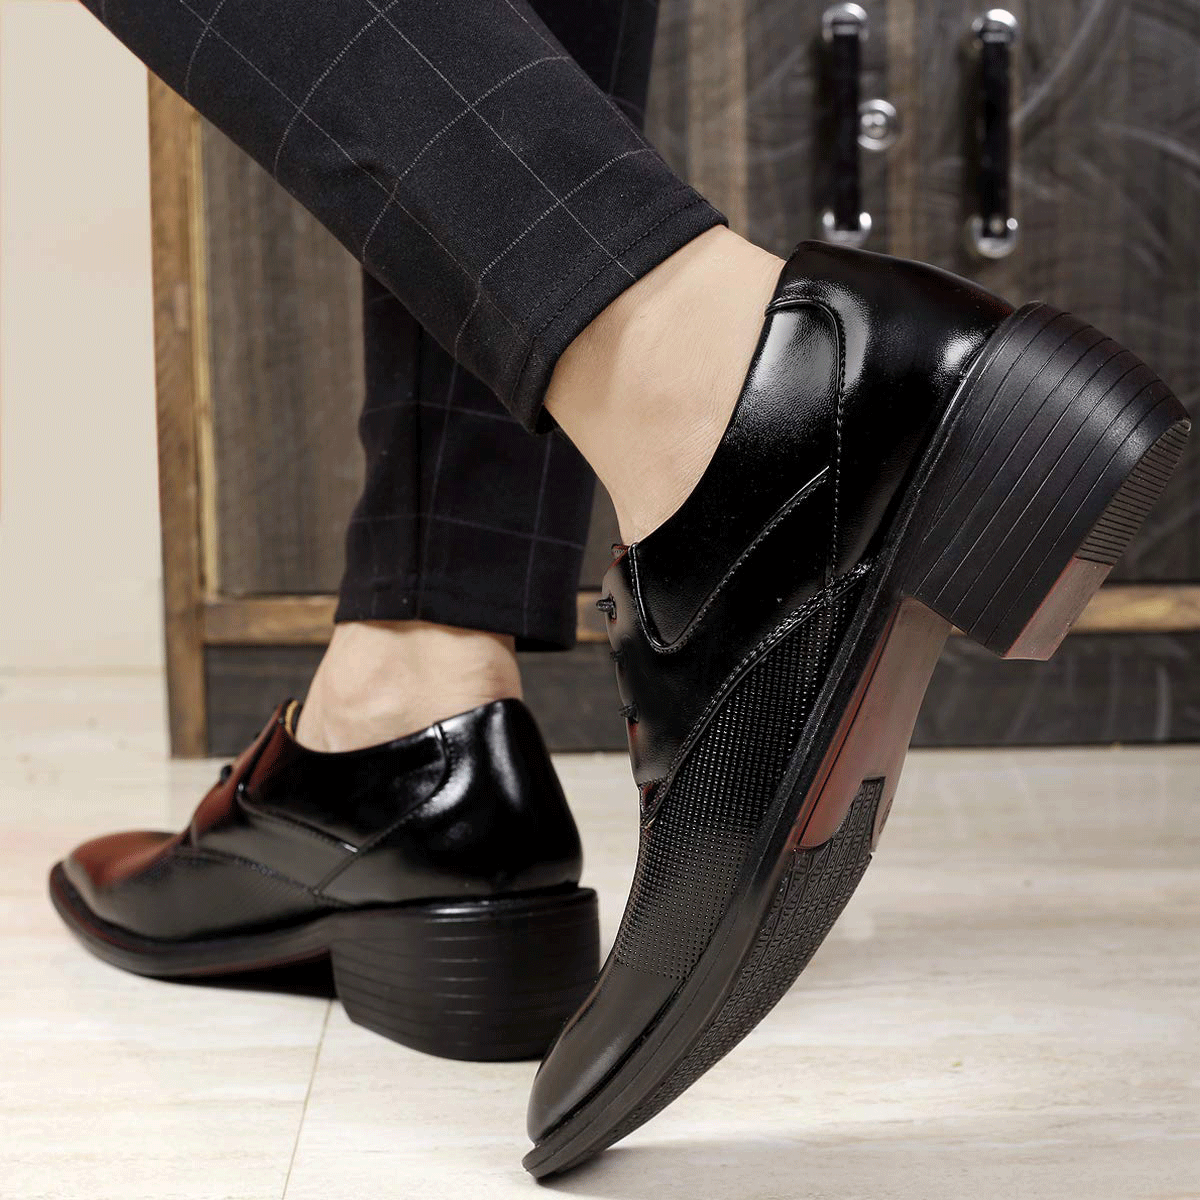 Classy Black Oxford Formal, Casual And Outdoor Shoes With High Heel-JonasParamount